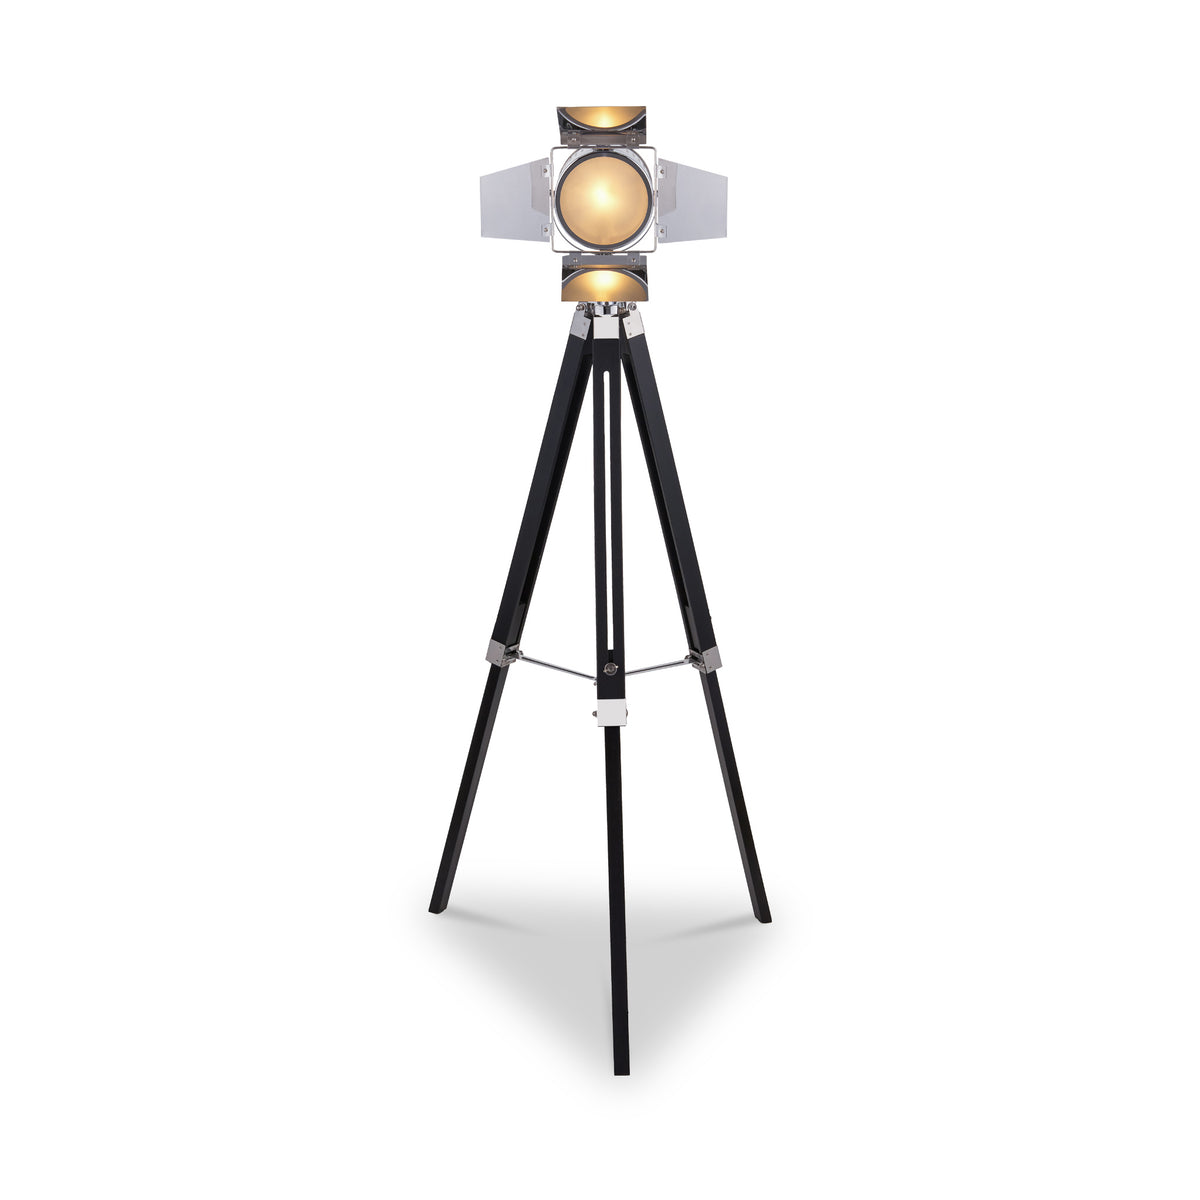 Hereford Silver and Black Tripod Floor Lamp from Roseland Furniture